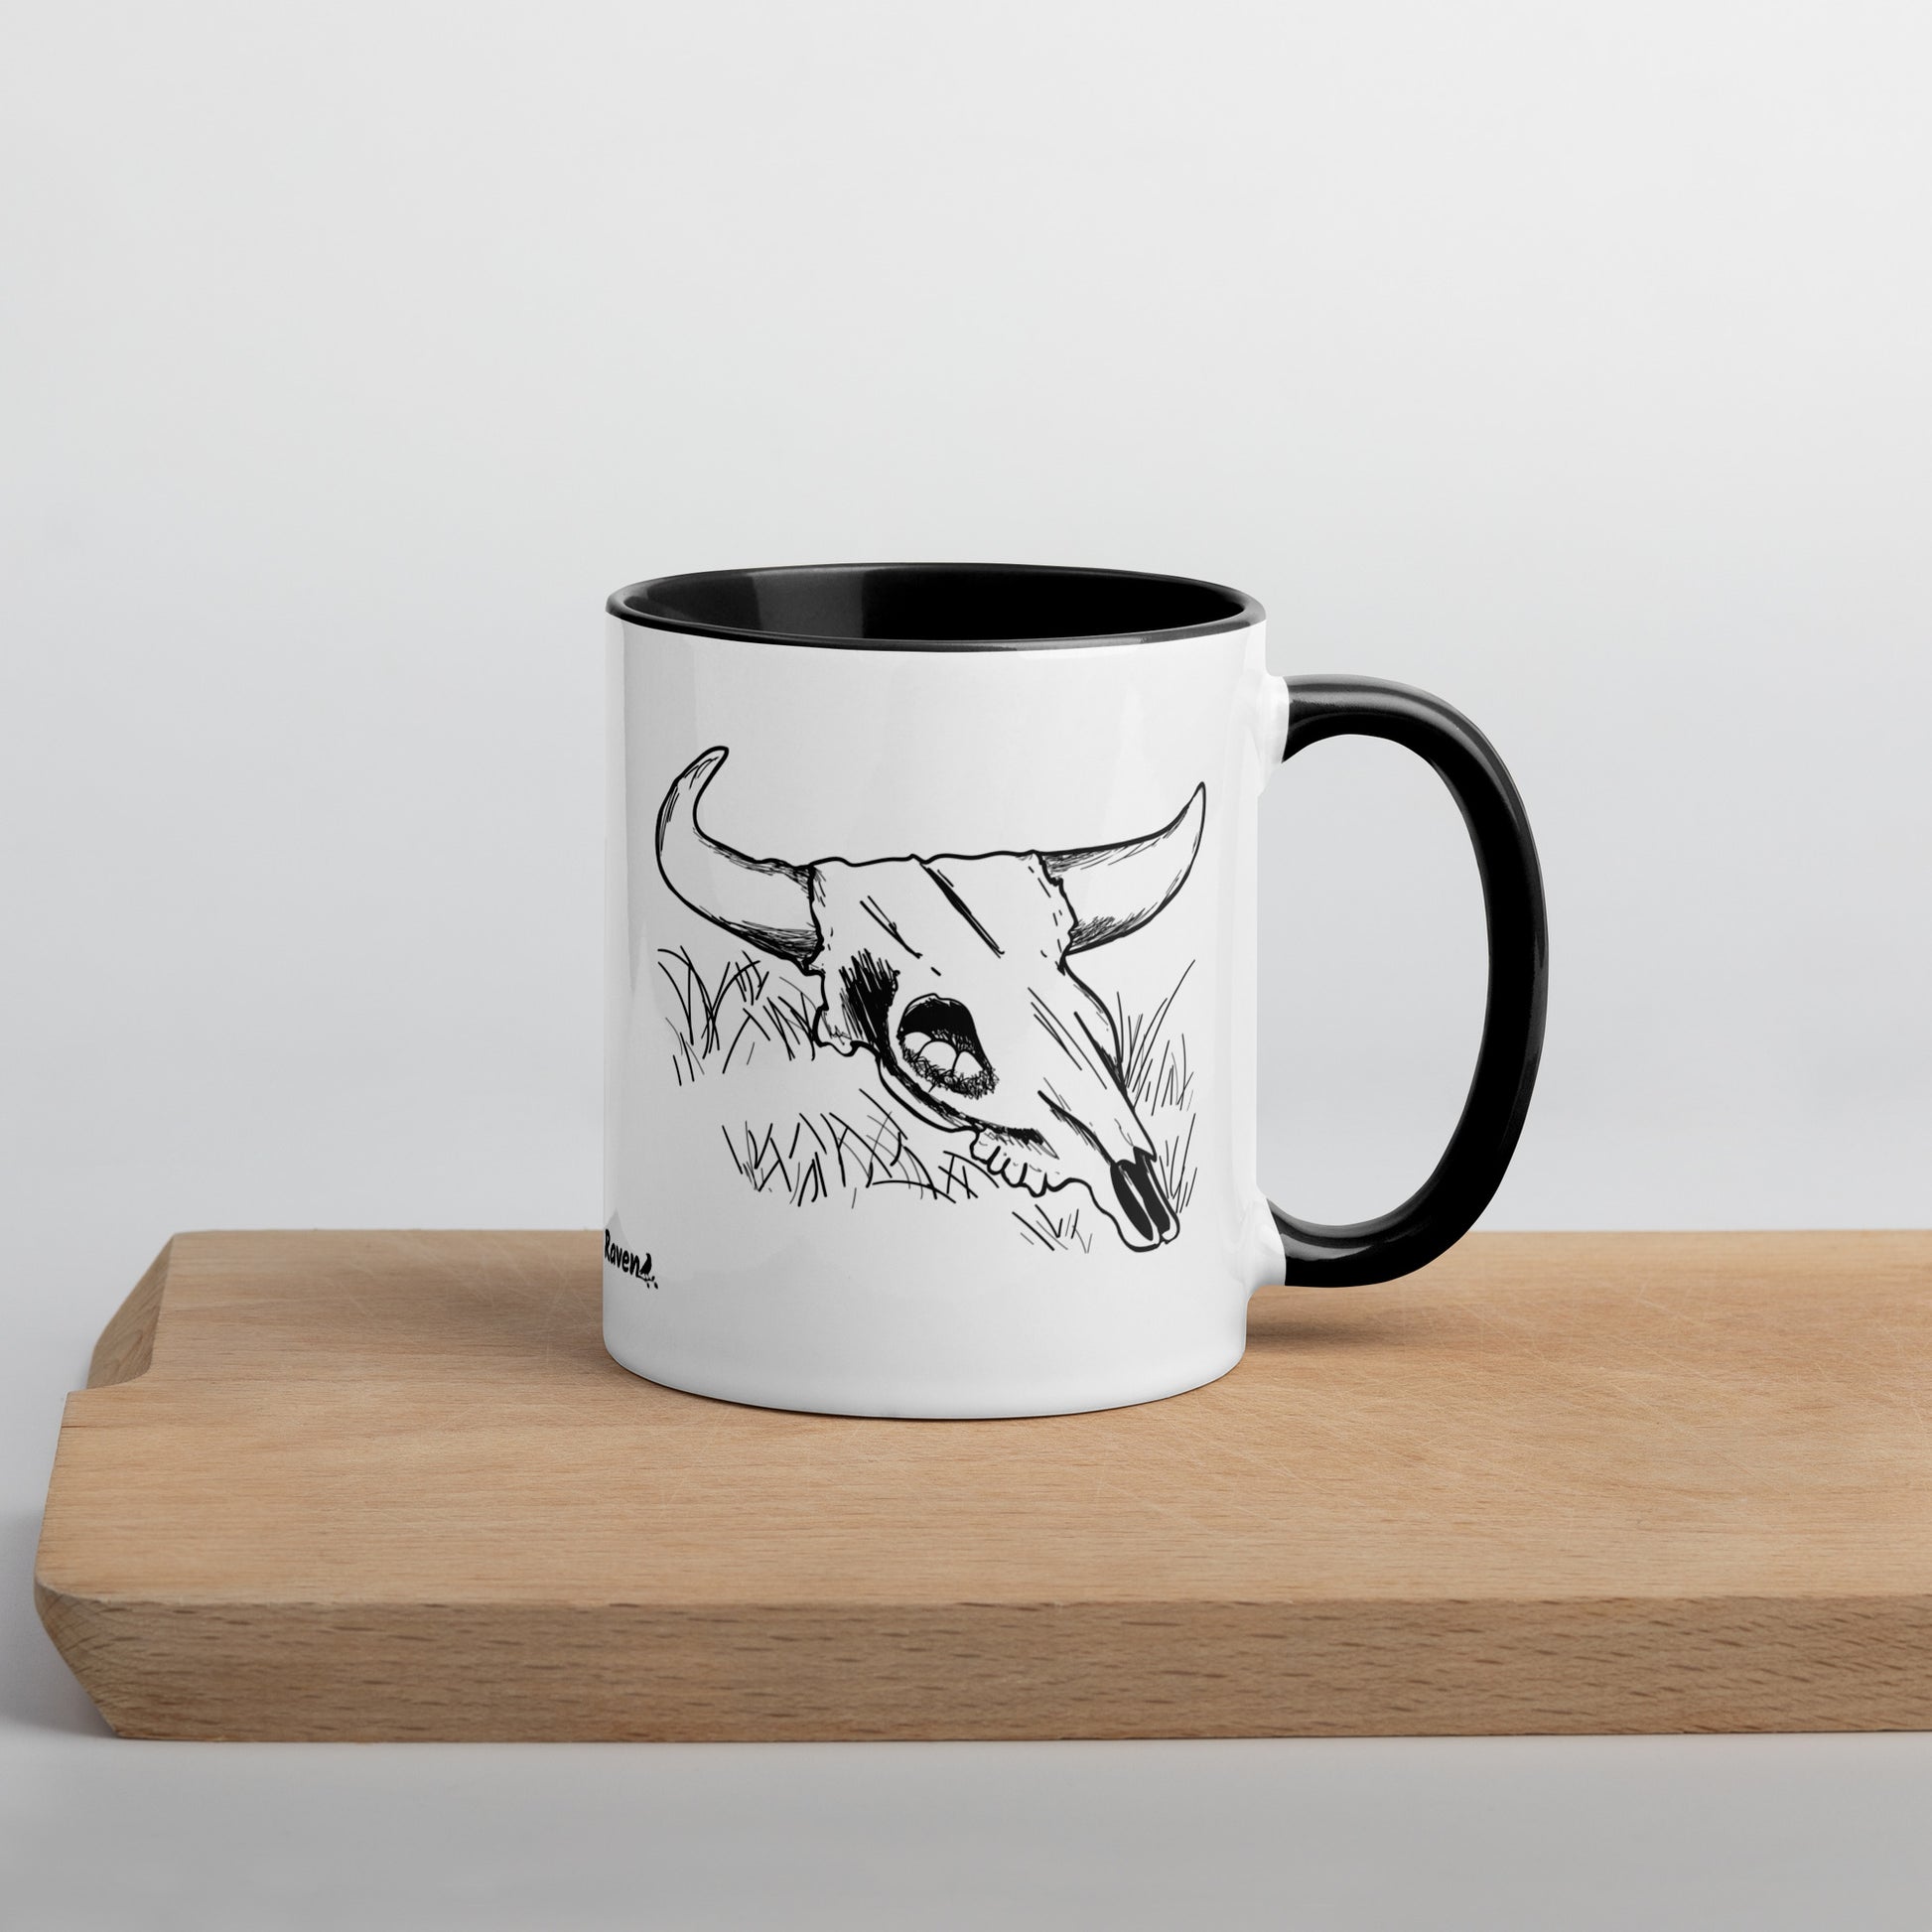 11 ounce ceramic mug. White with black handle and inside. Features double sided image of a cow skull cradling a bird nest. Shown on wooden cutting board.